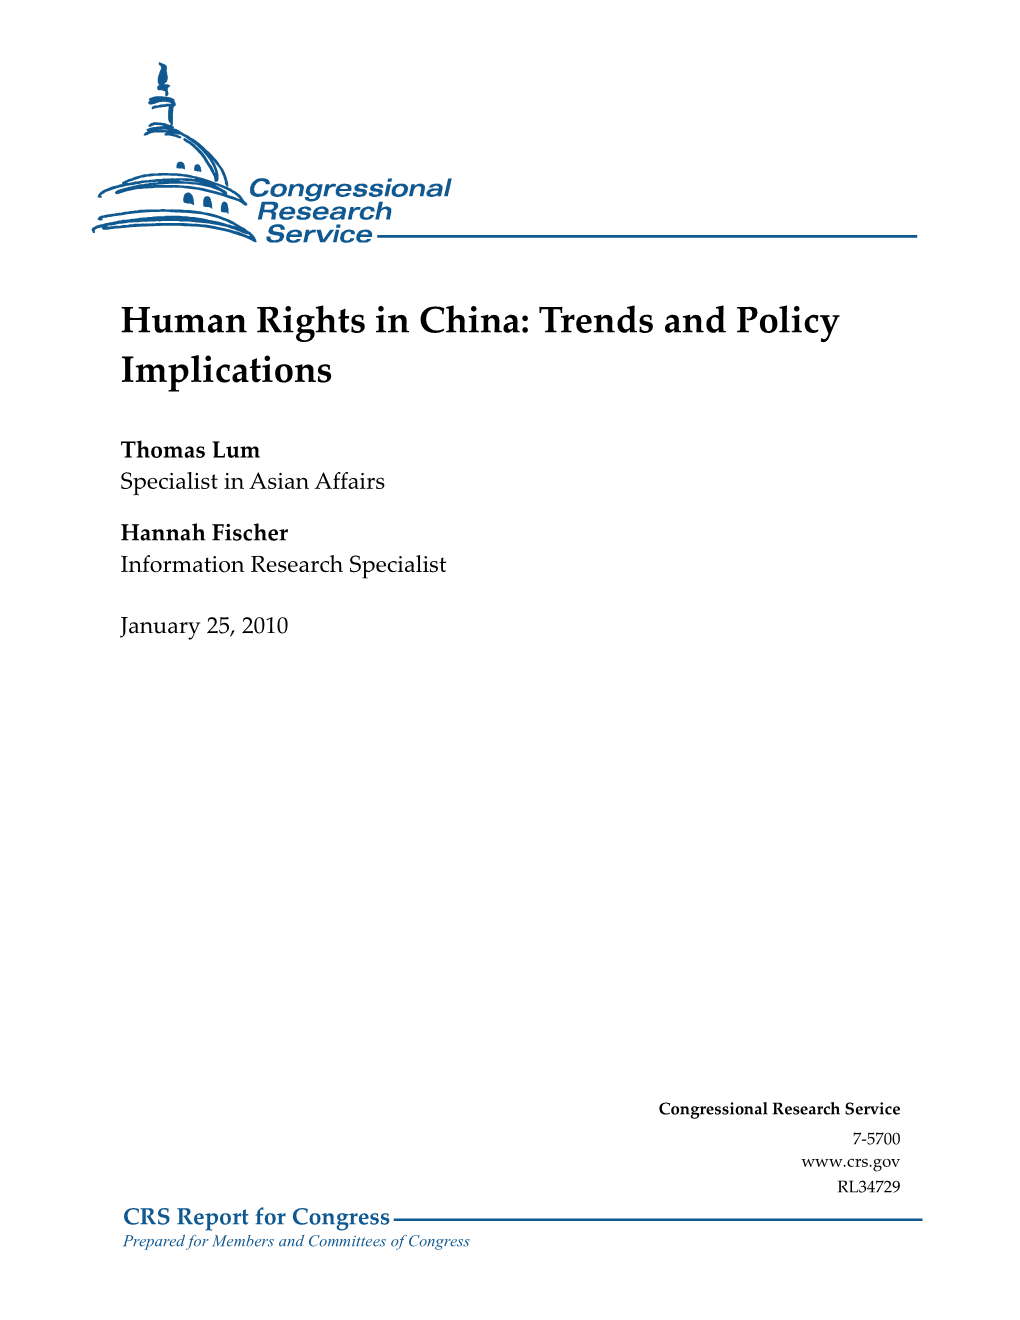 Human Rights in China: Trends and Policy Implications